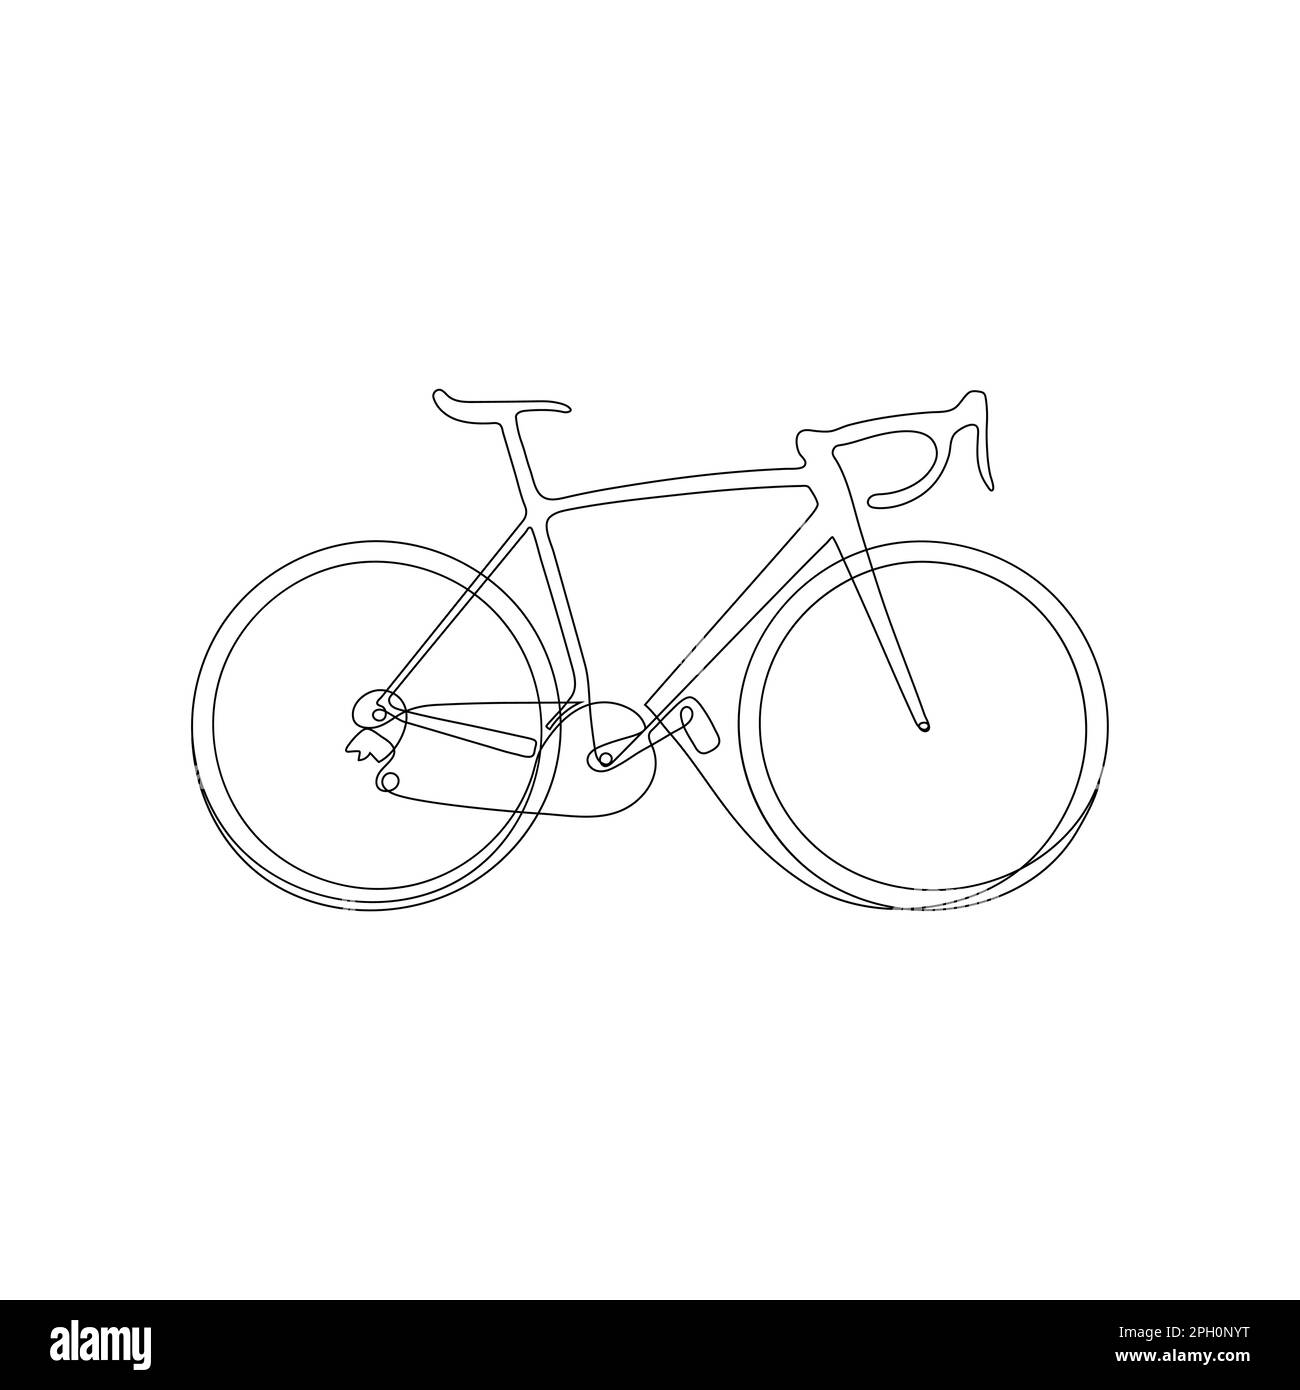 231 Simple Bike Drawing High Res Illustrations - Getty Images